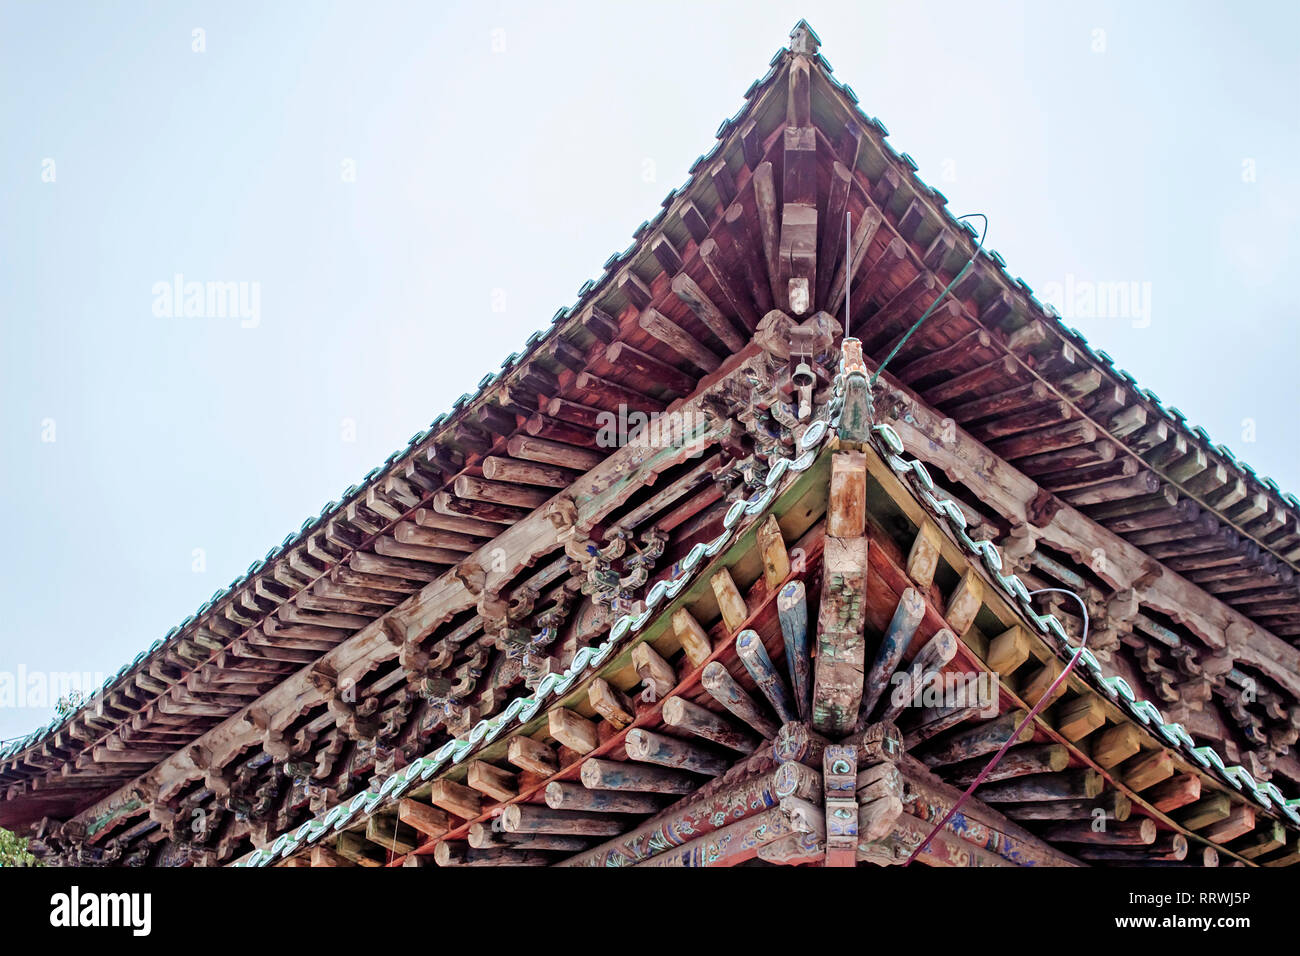 Wooden Traditional Chinese Roof Of Pagoda. Roof Structure Of Buddhist Temple. Oriental Architecture Of Kumbum Monastery in Xining. Stock Photo